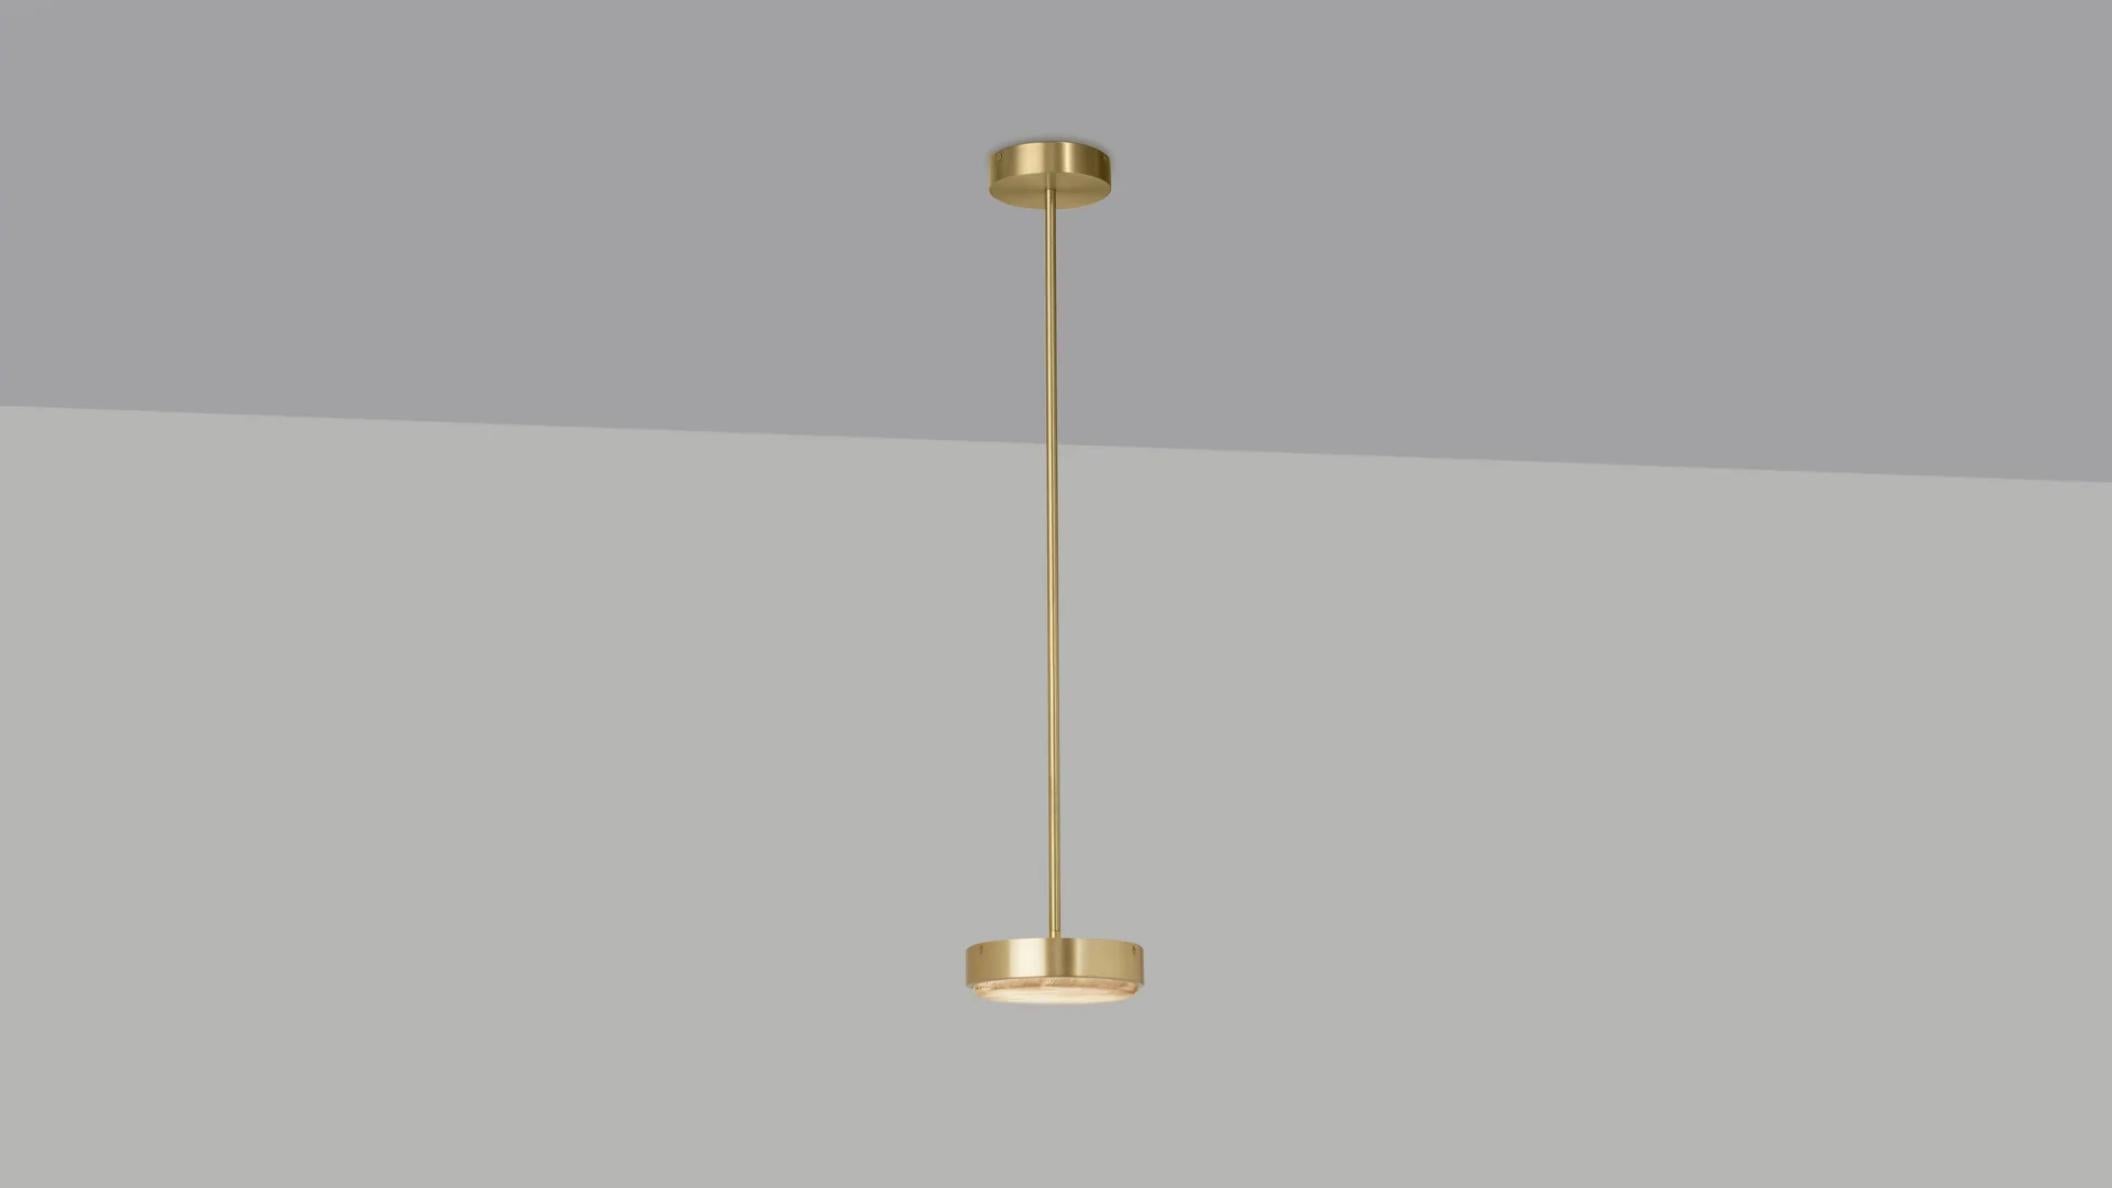 Anvers small pendant by CTO Lighting
Materials: satin brass with alabaster stone.
Also available in bronze with alabaster stone.
Dimensions: H 6.8 x W 19.5 cm 

All our lamps can be wired according to each country. If sold to the USA it will be